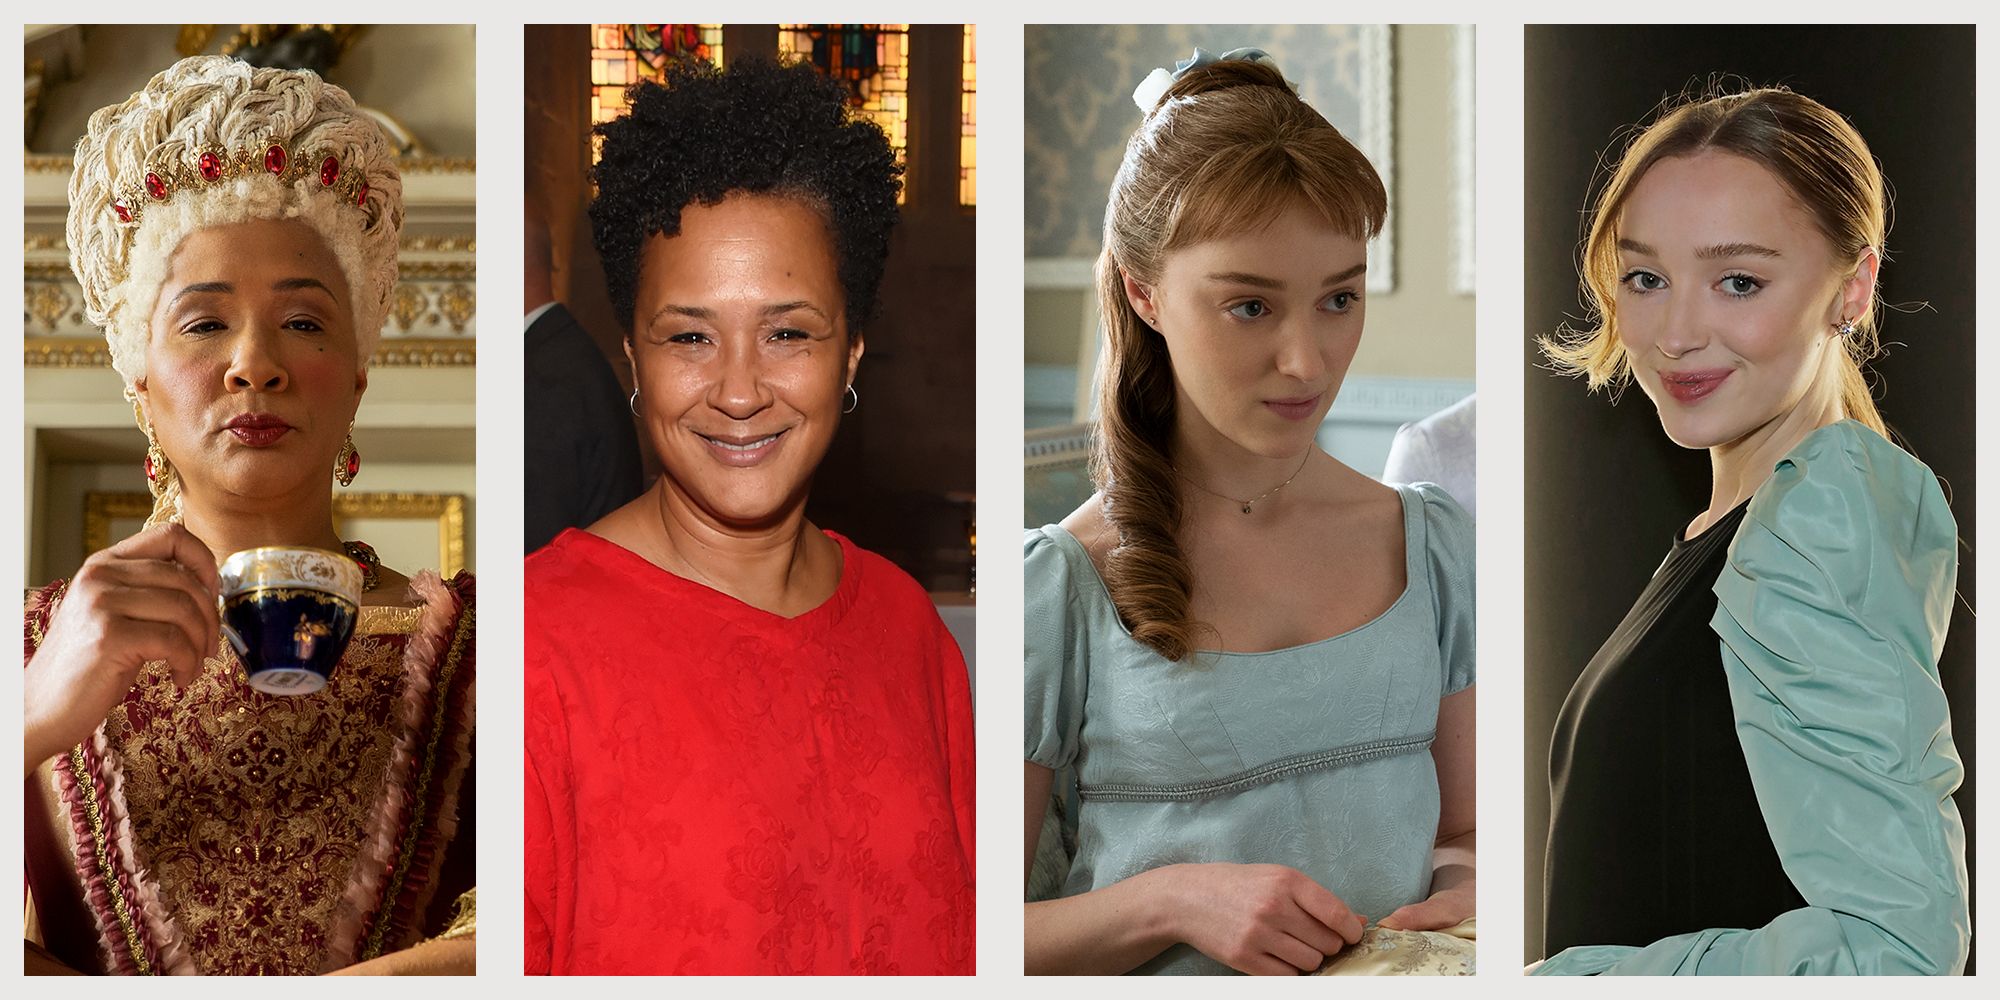 See the Bridgerton Cast in Real Life, from Rege-Jean Page to Julie Andrews pic